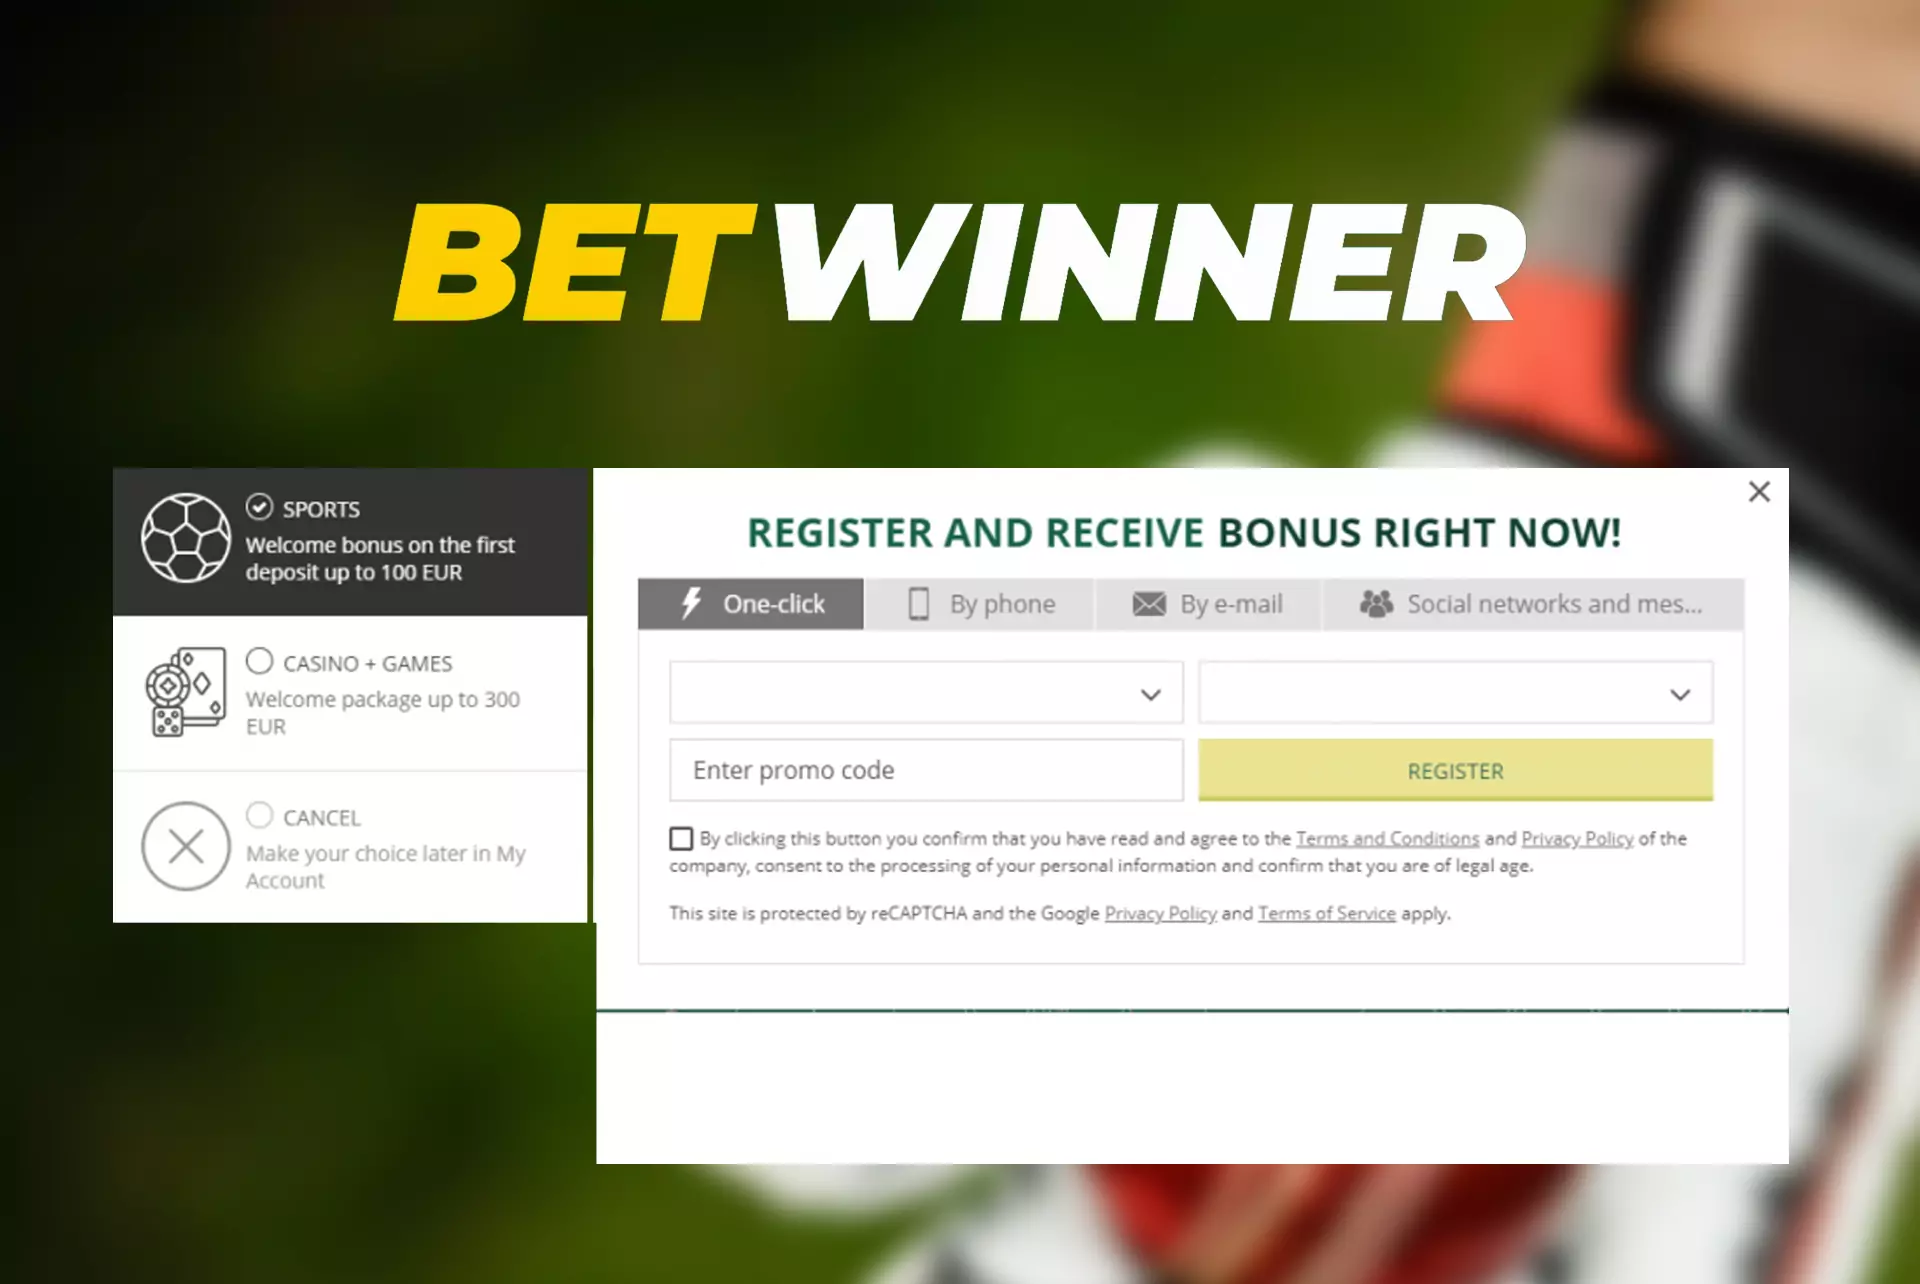 Register a new Betwinner account to bet on cricket.